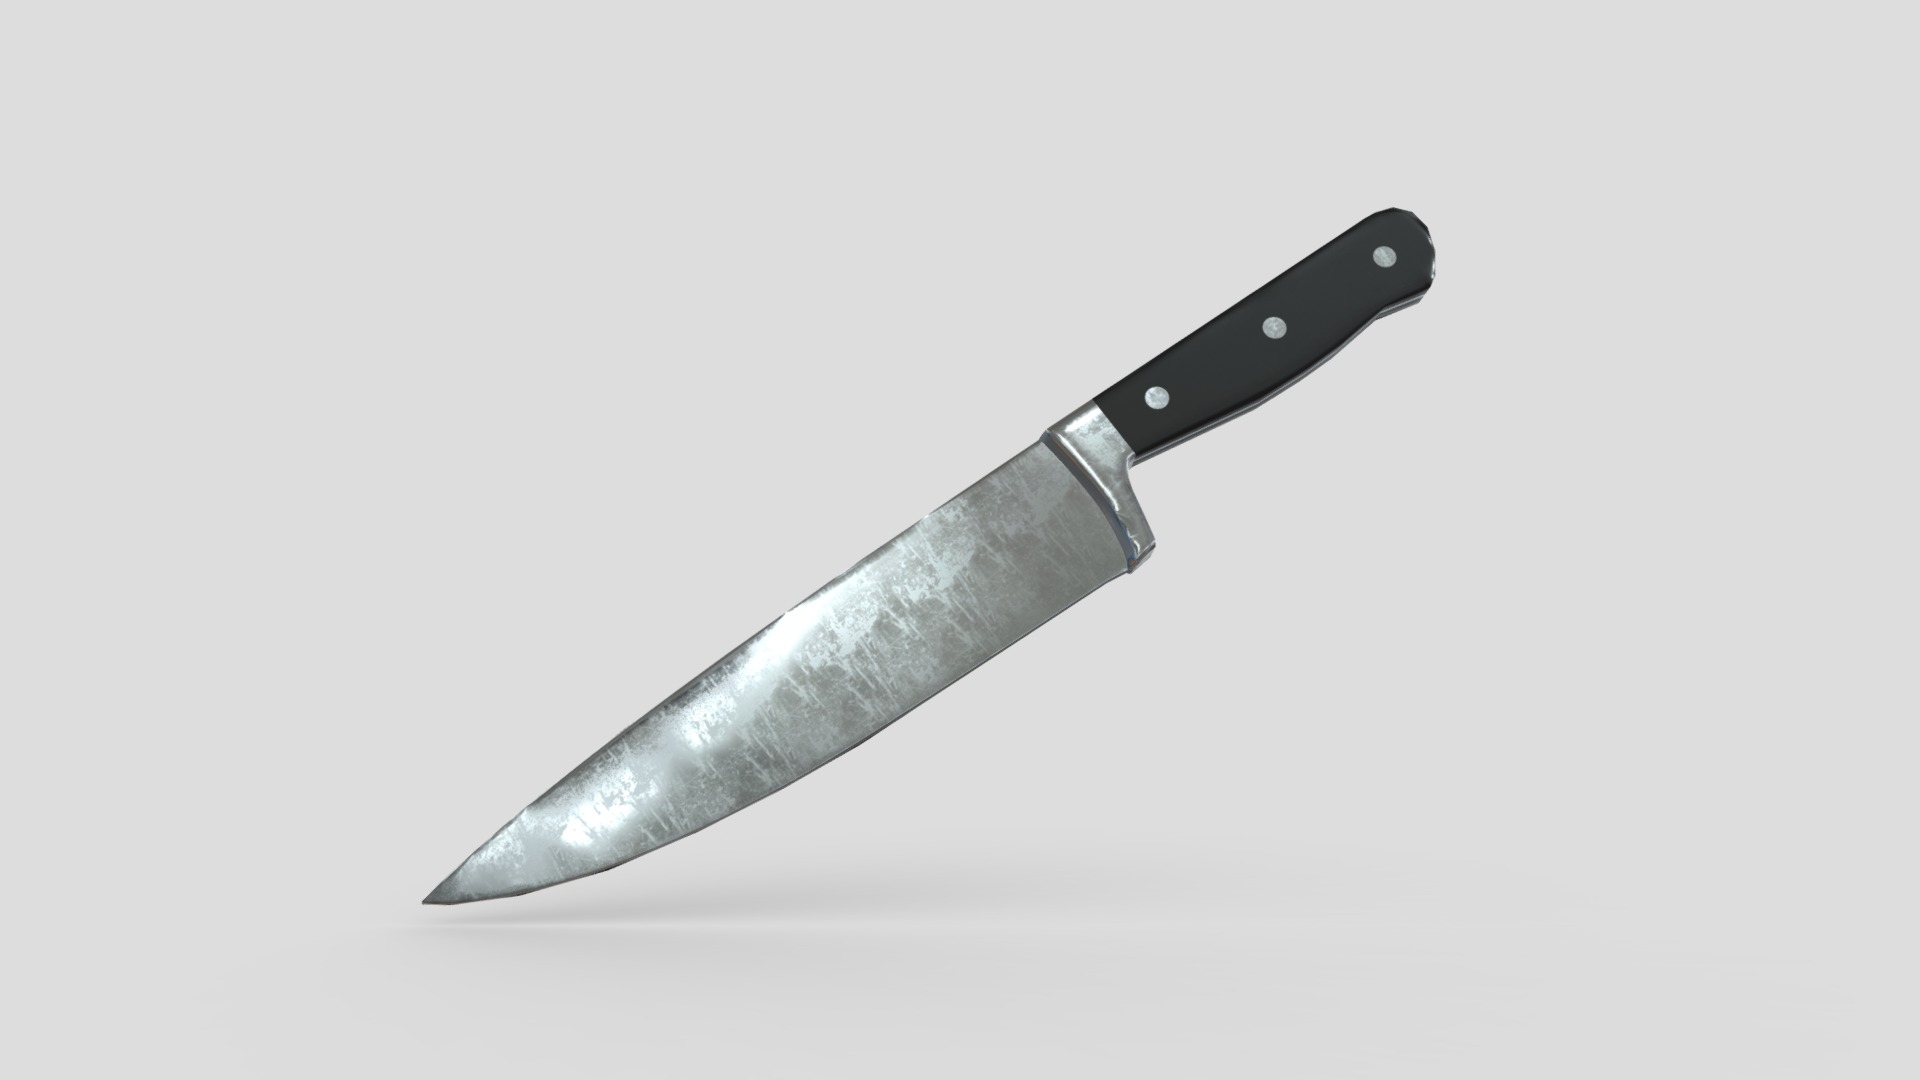 3D model Kitchen Knife - This is a 3D model of the Kitchen Knife. The 3D model is about a silver knife with a black handle.